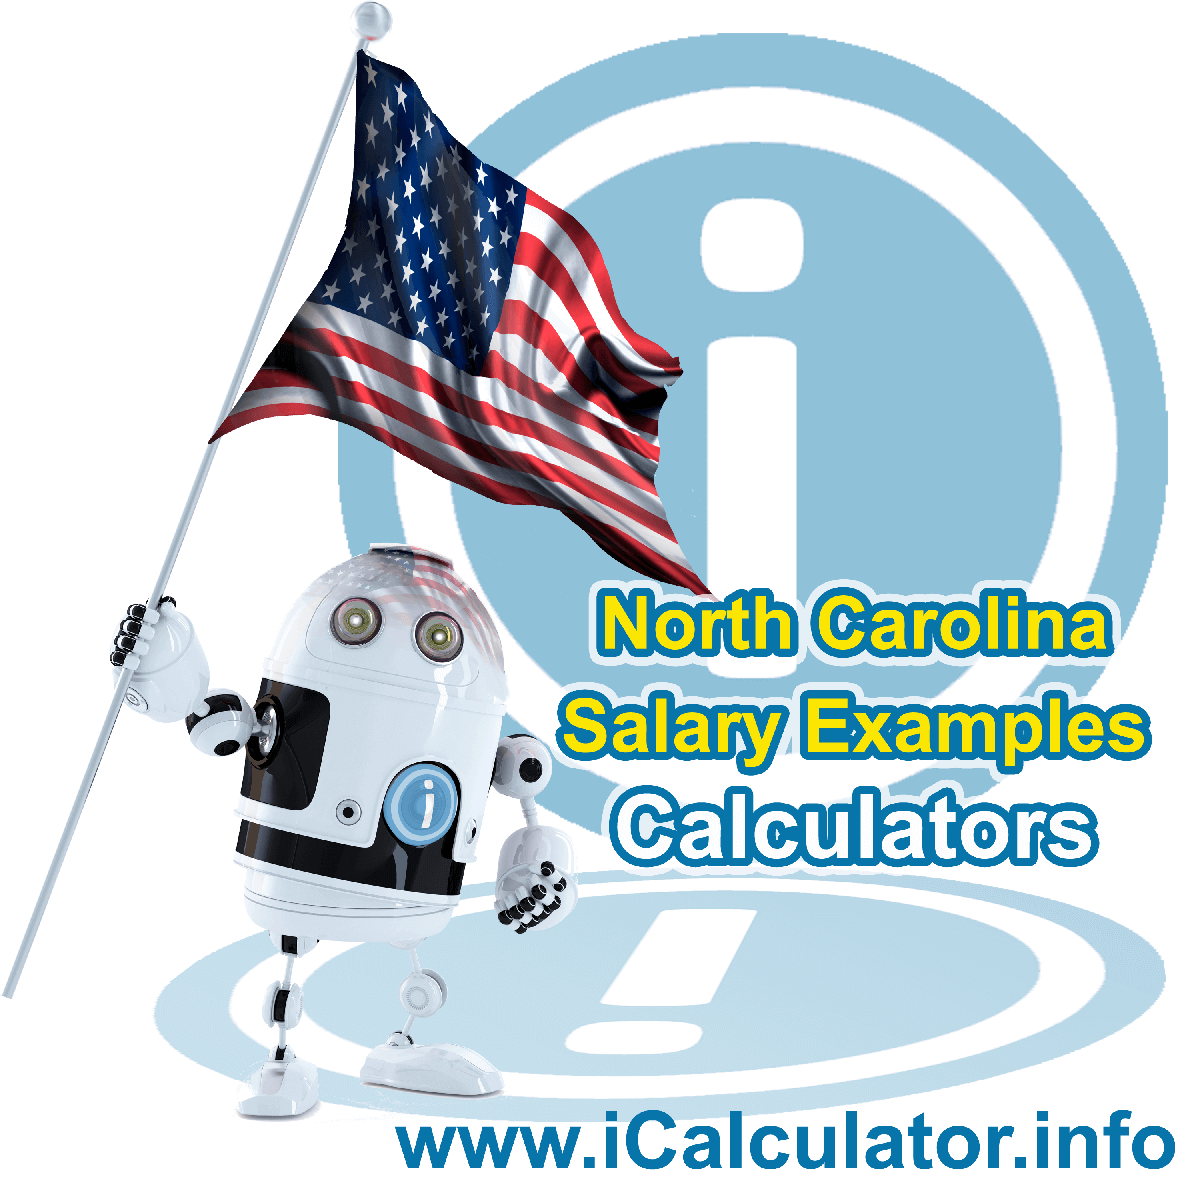 North Carolina Salary Example for $ 20,000.00 in 2023 | iCalculator™ | $ 20,000.00 salary example for employee and employer paying North Carolina State tincome taxes. Detailed salary after tax calculation including North Carolina State Tax, Federal State Tax, Medicare Deductions, Social Security, Capital Gains and other income tax and salary deductions complete with supporting North Carolina state tax tables 